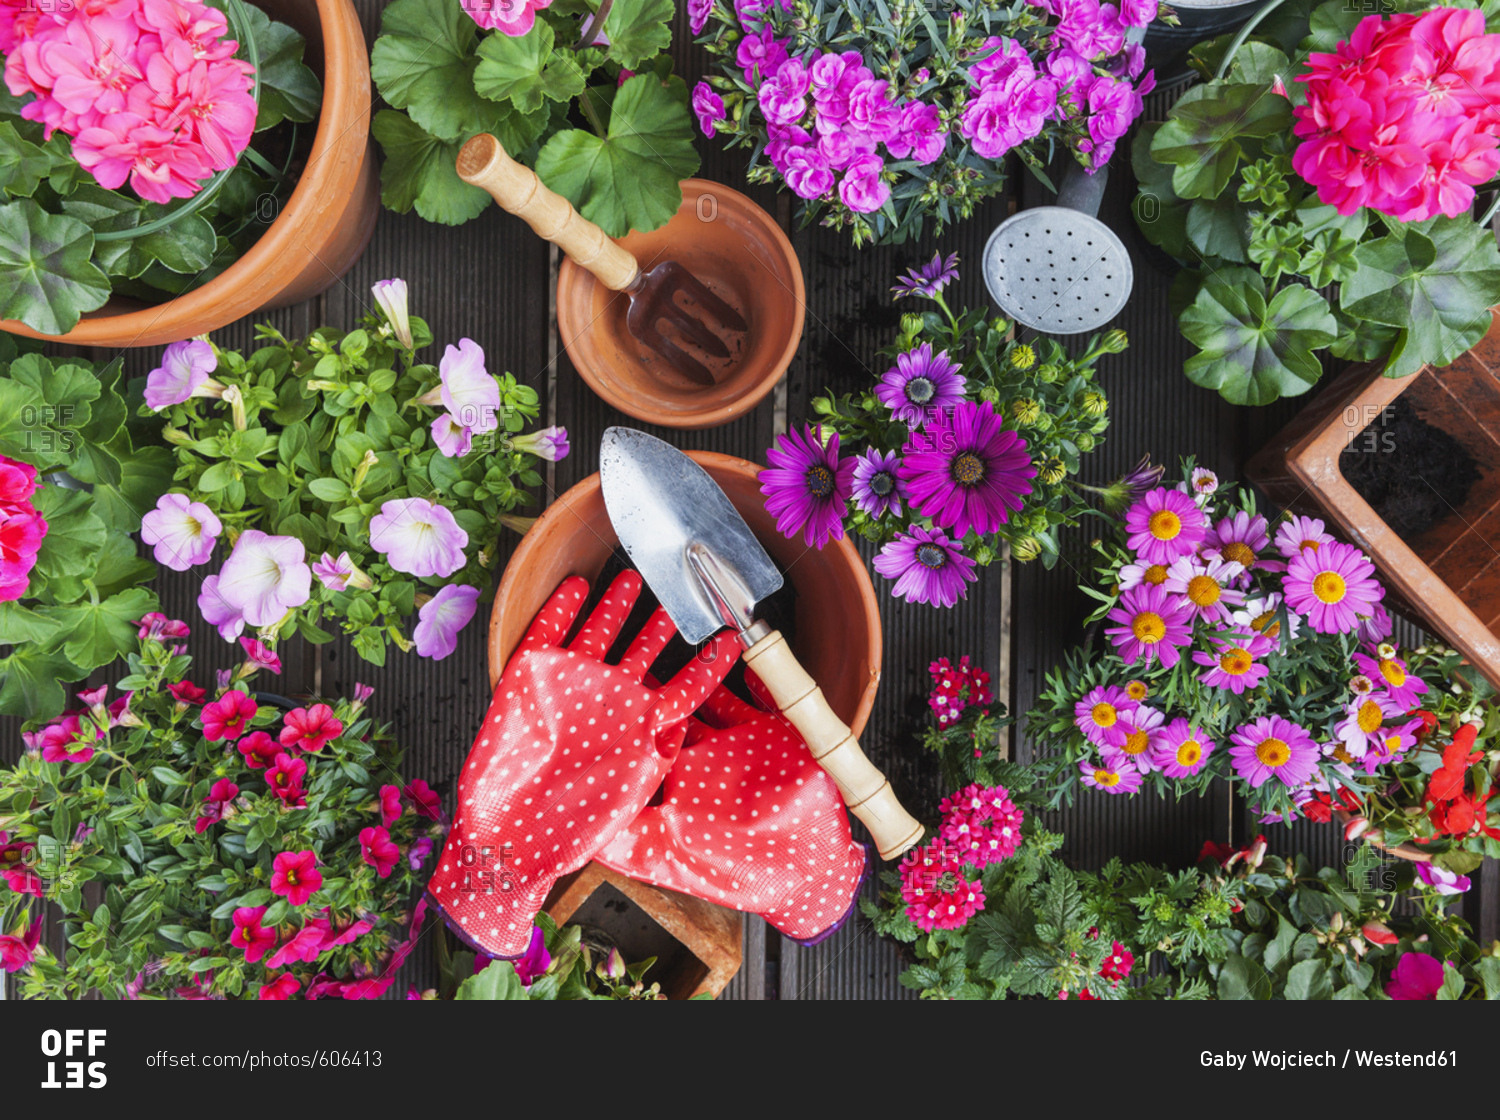 Gardening- different spring and summer flowers- gardening tools on garden table